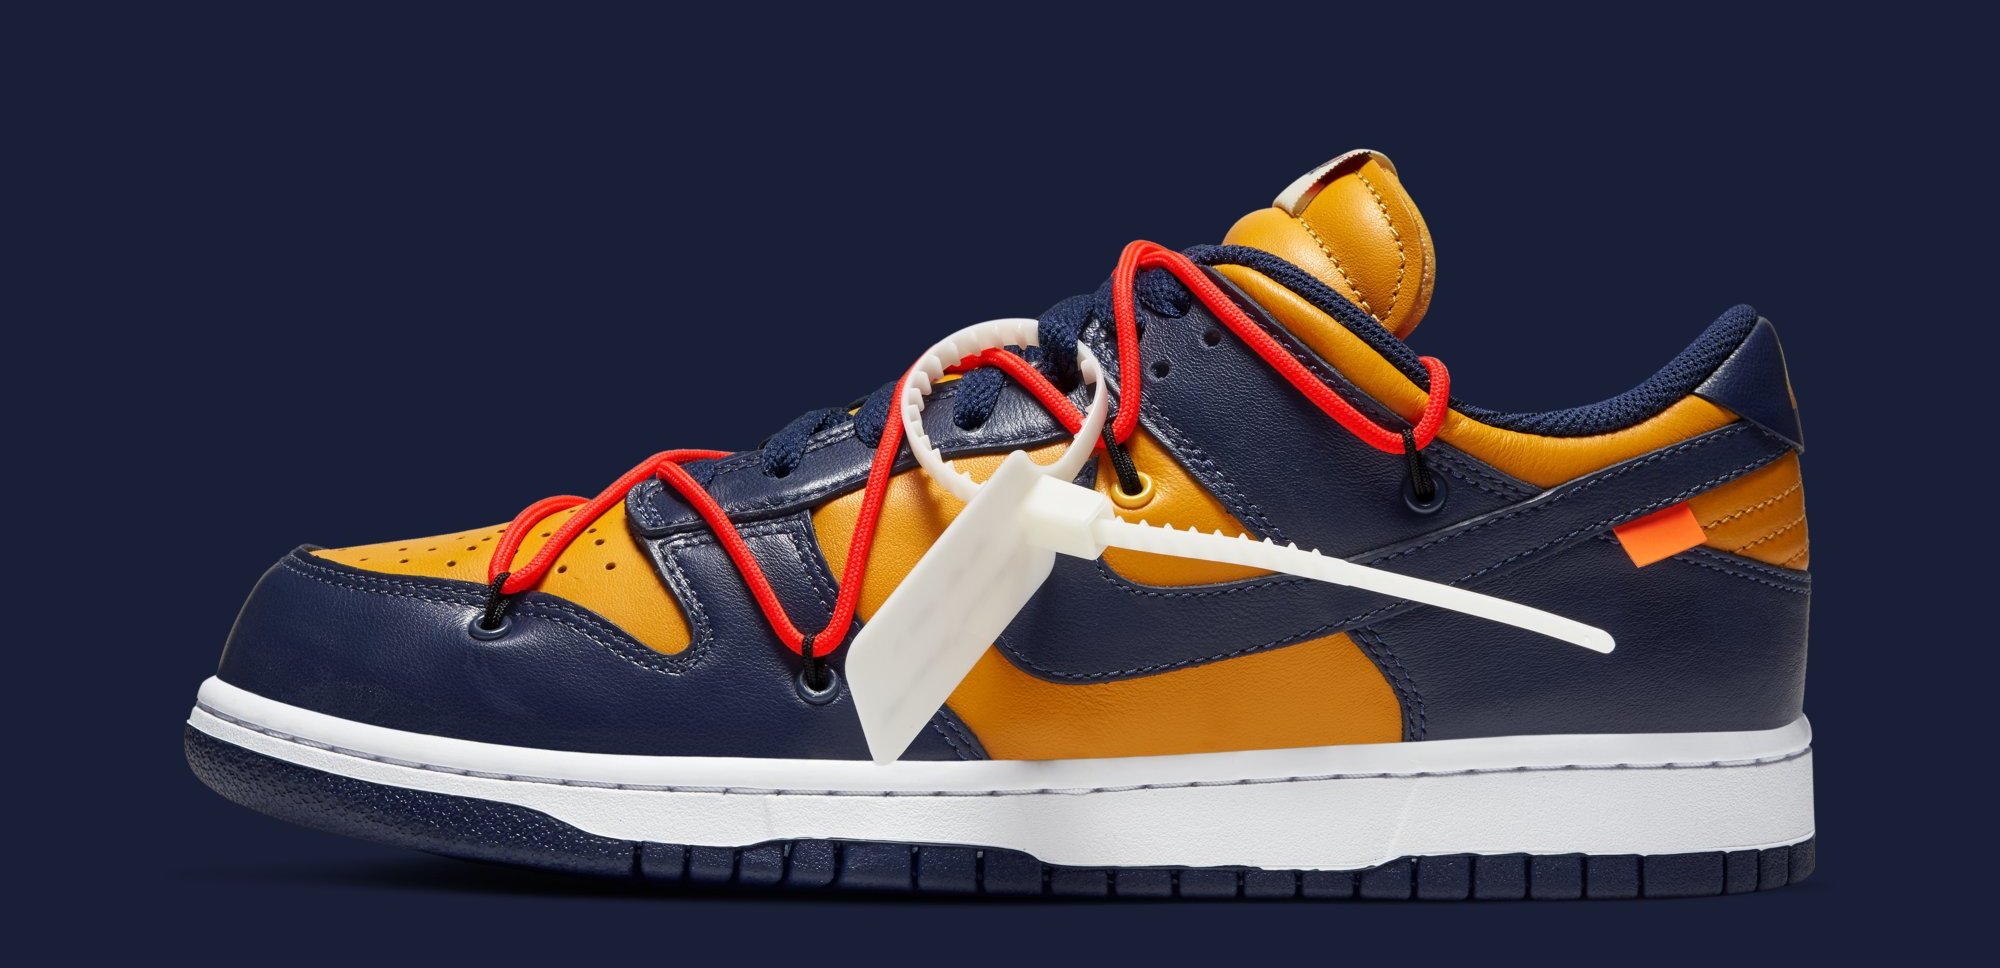 Off White x Nike Dunk Low &#x27;University Gold/White/Midnight Navy&#x27; CT0856 700 (Lateral)